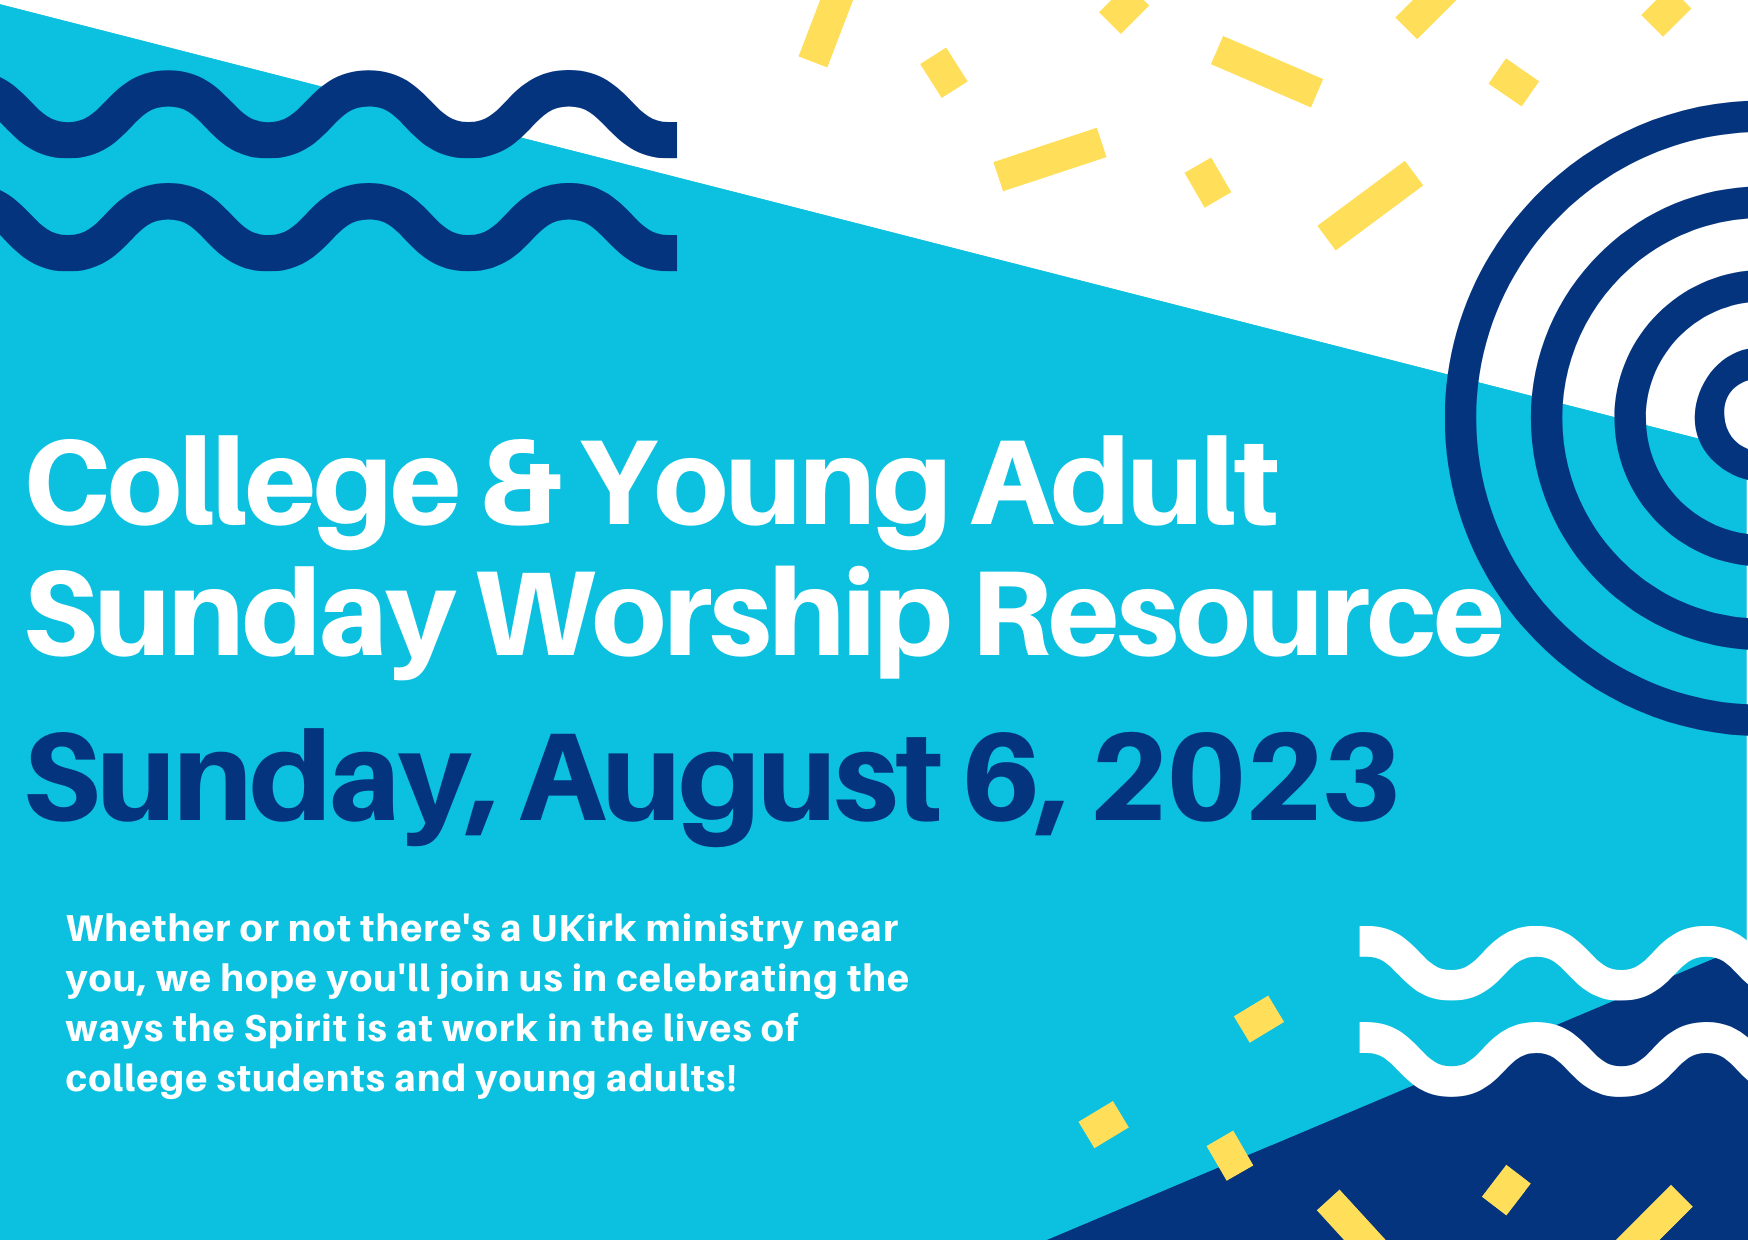 2023 College & Young Adult Sunday Worship Resources